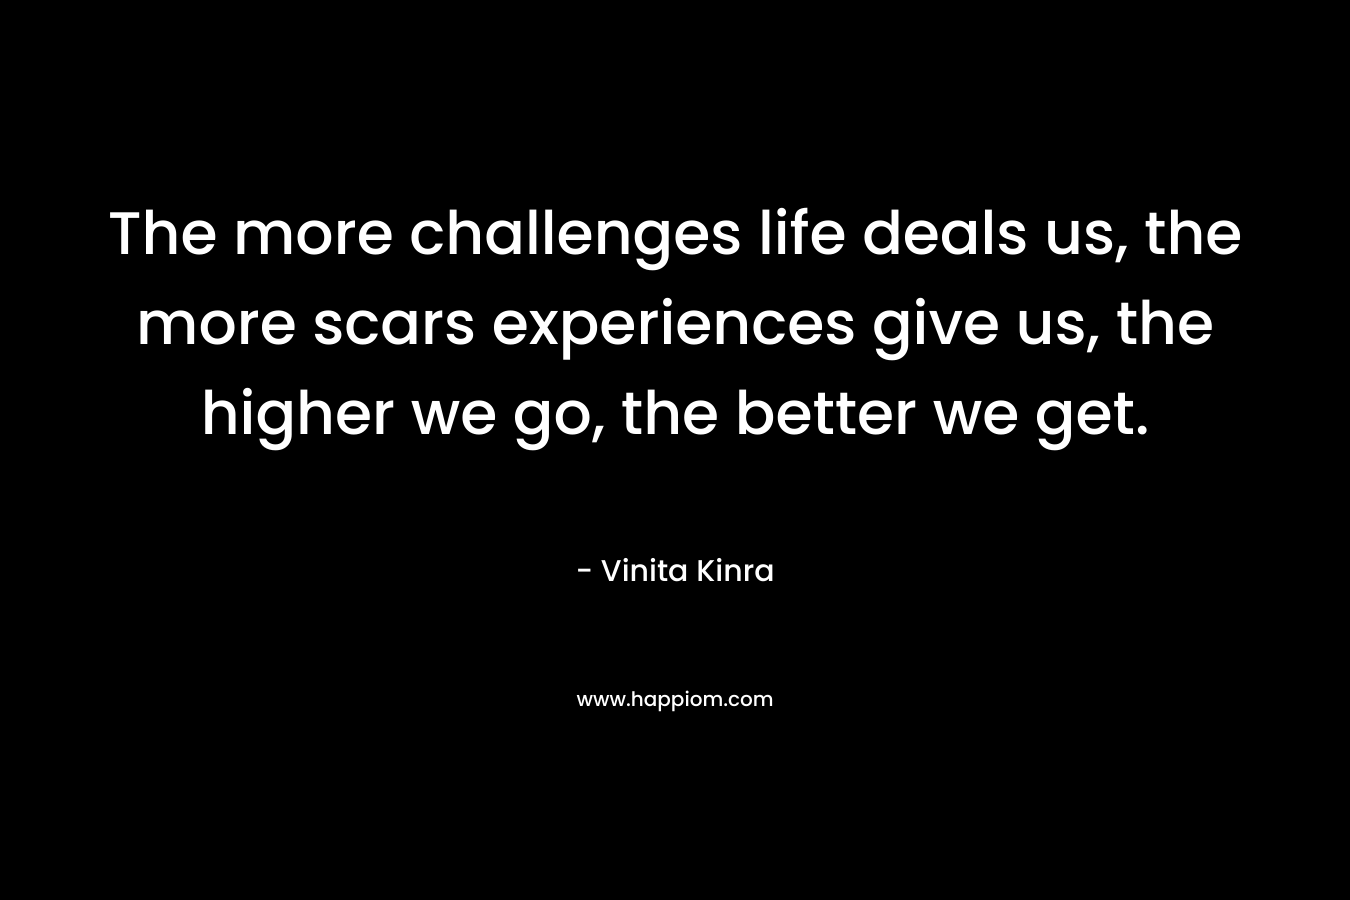 The more challenges life deals us, the more scars experiences give us, the higher we go, the better we get.